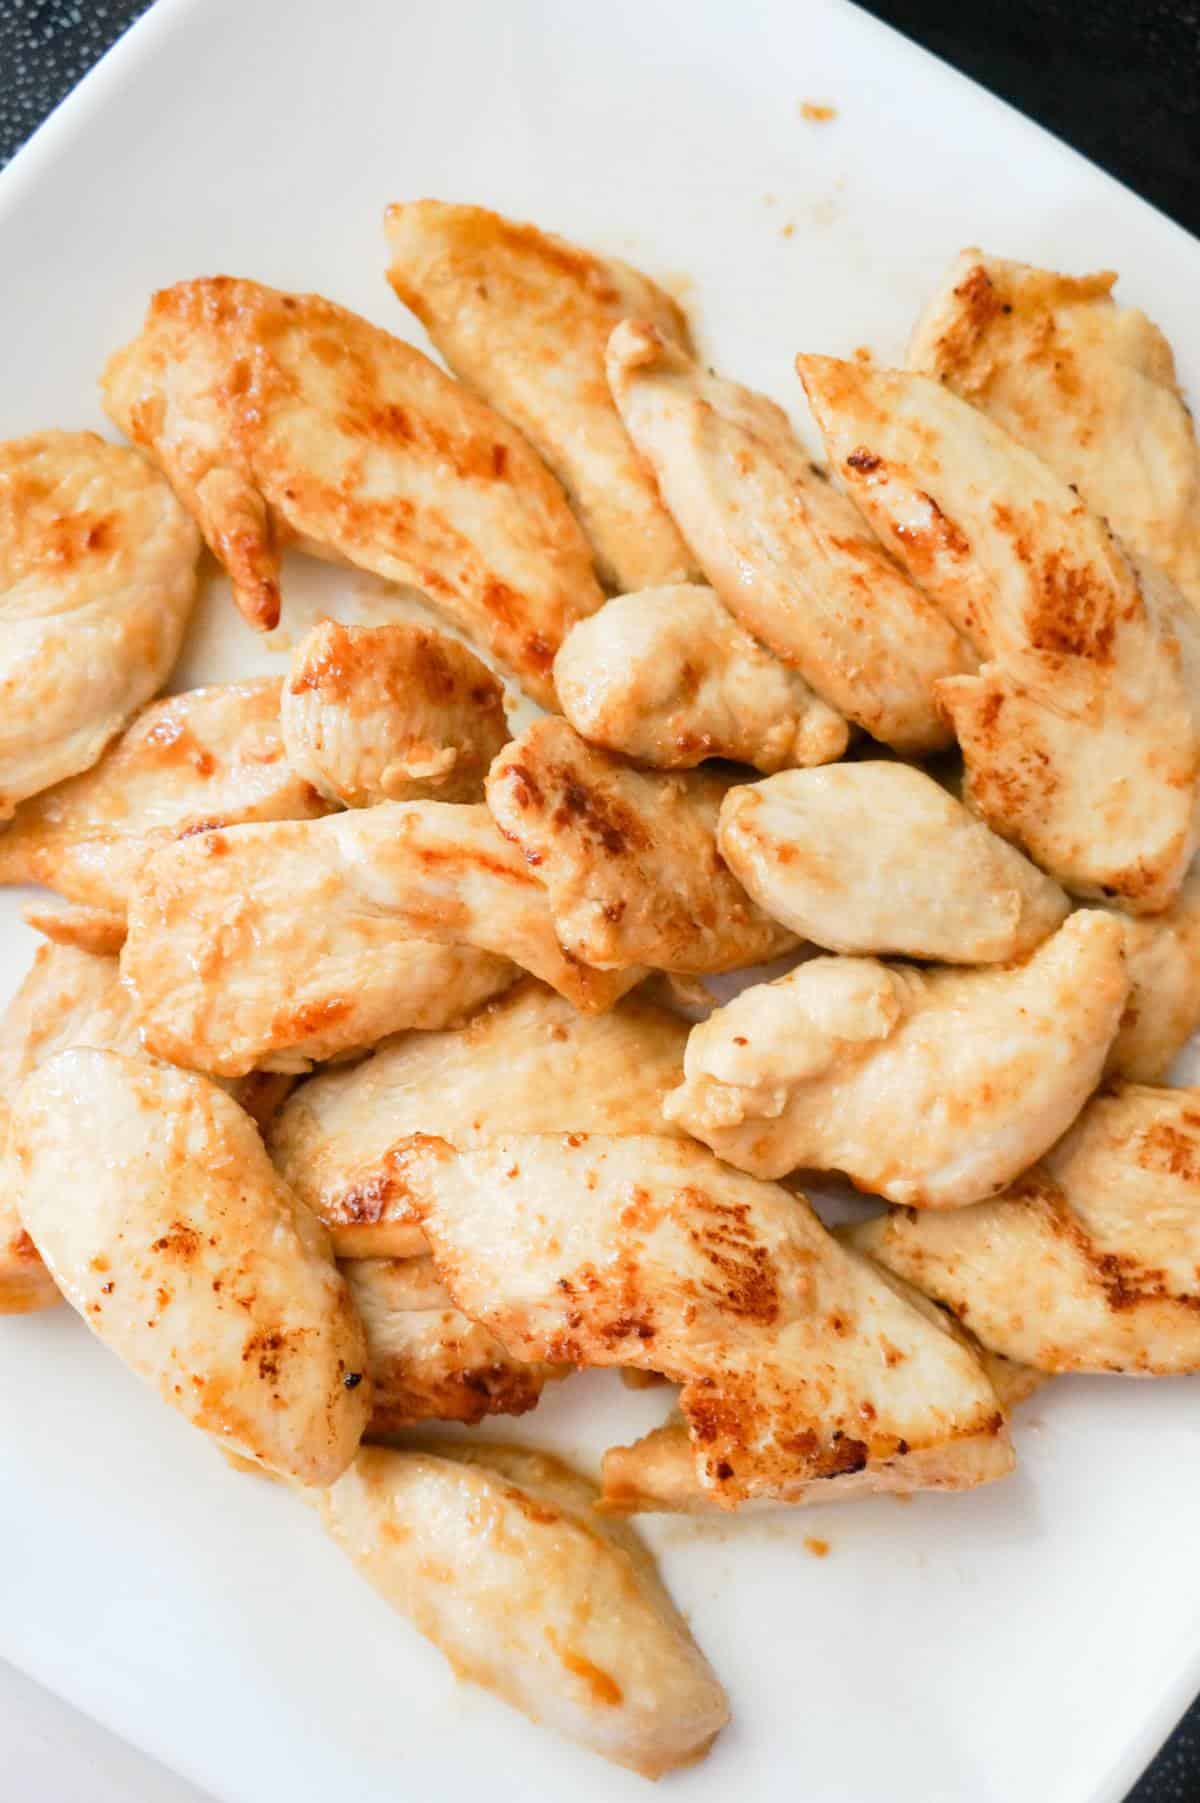 cooked chicken breast slices on a plate